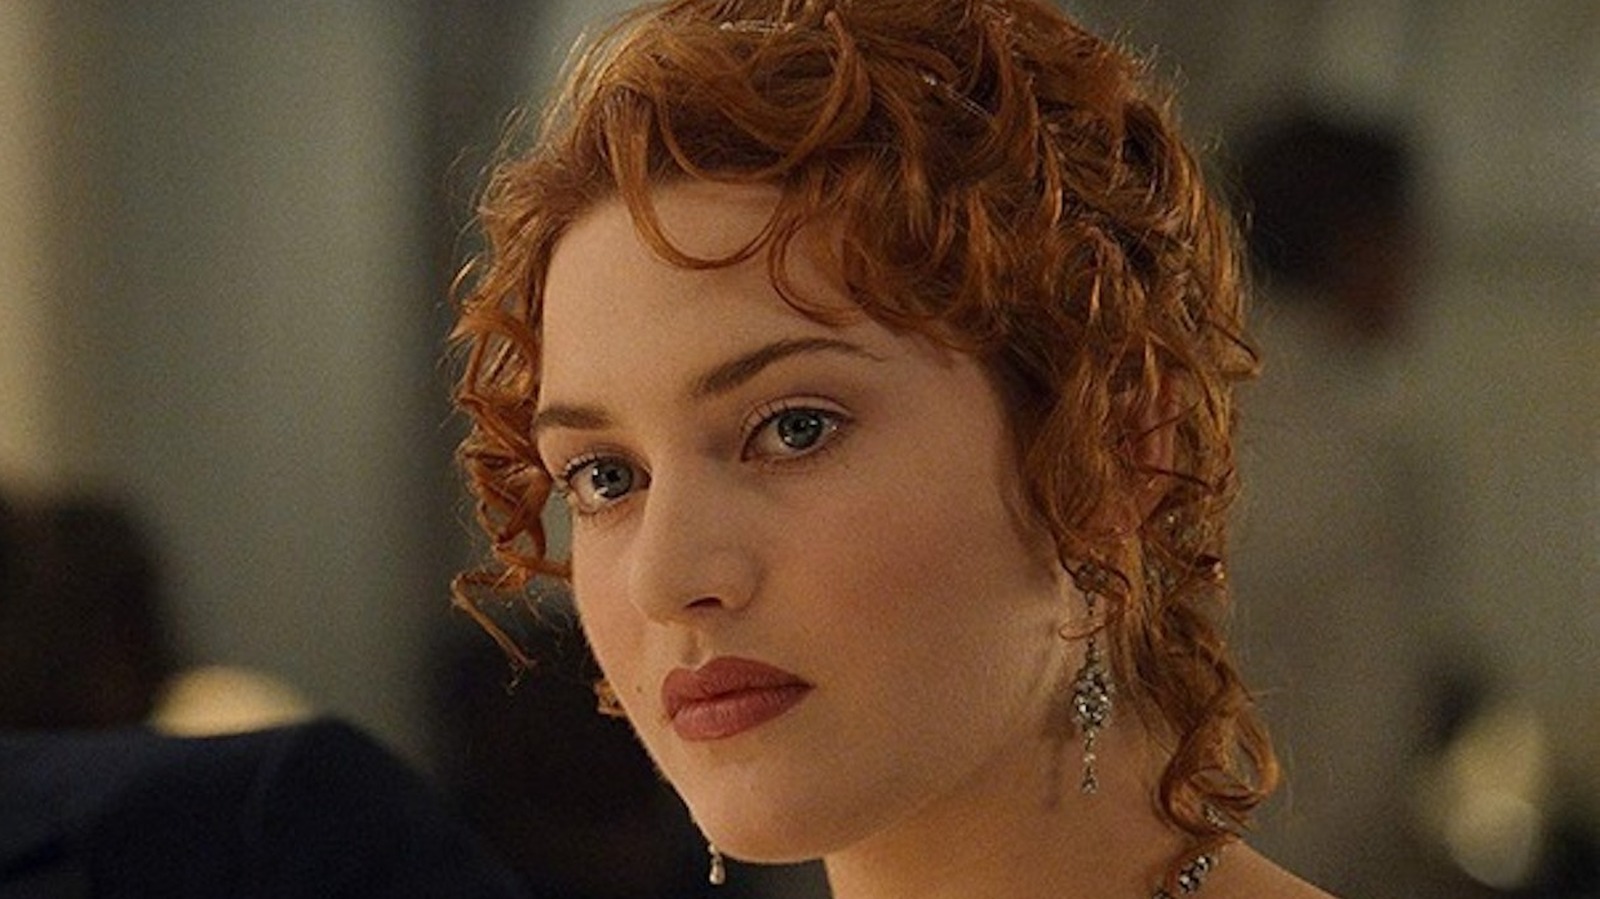 Here's What The Cast Of Titanic Looks Like Exactly 20 Years Later